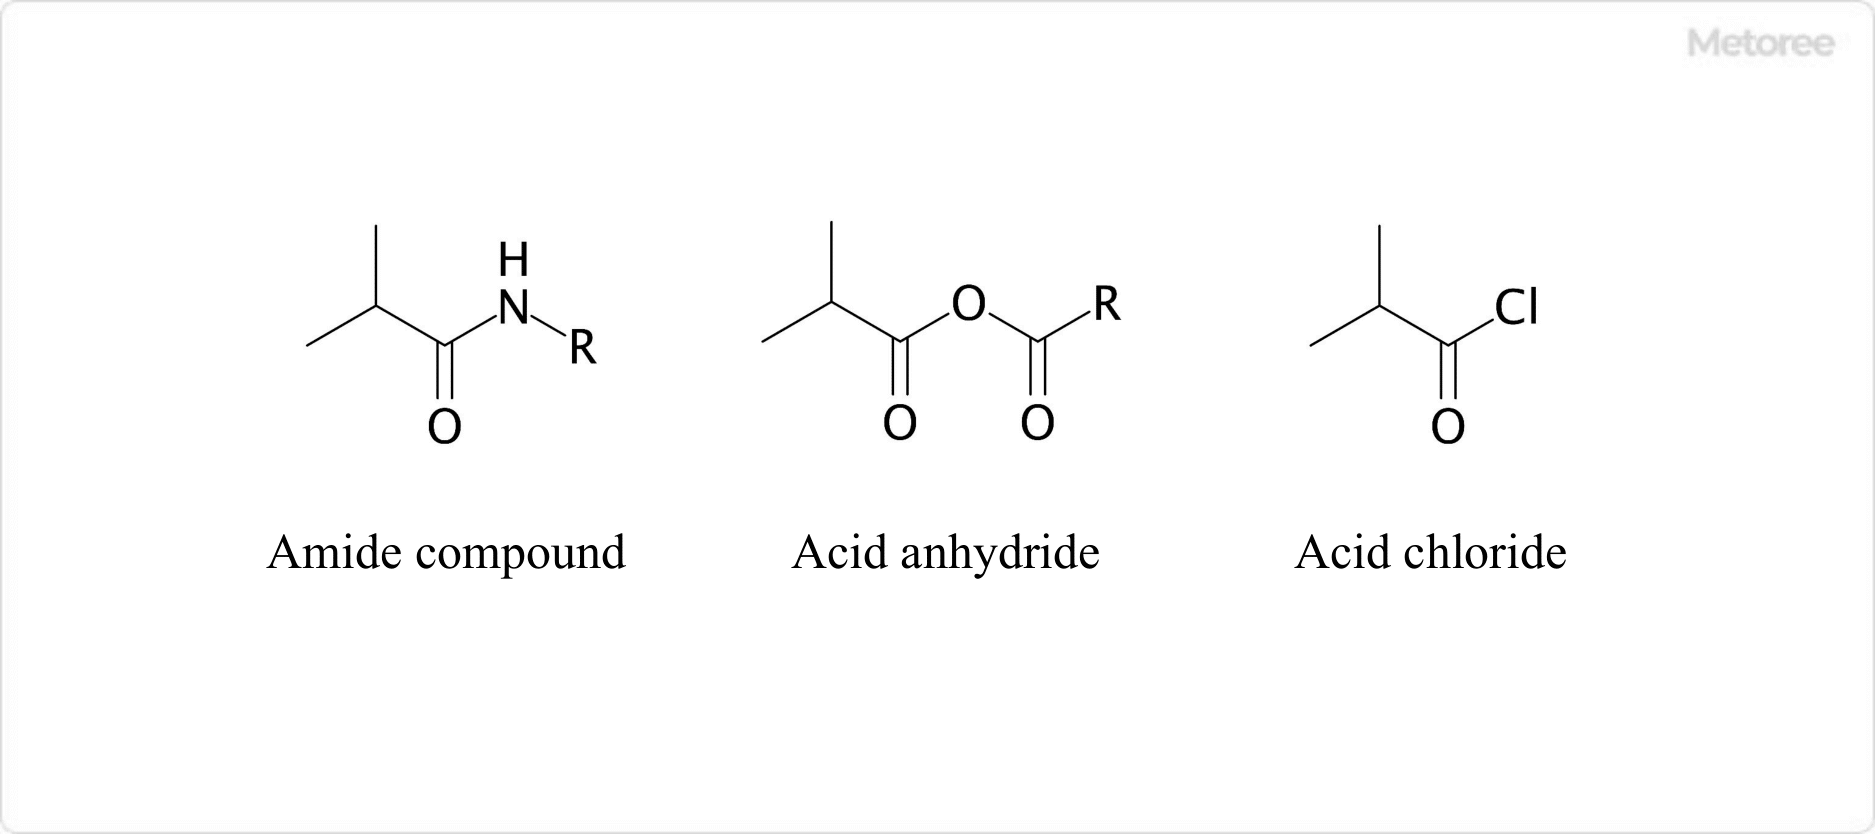 Examples of derivatives of isobutyric acid